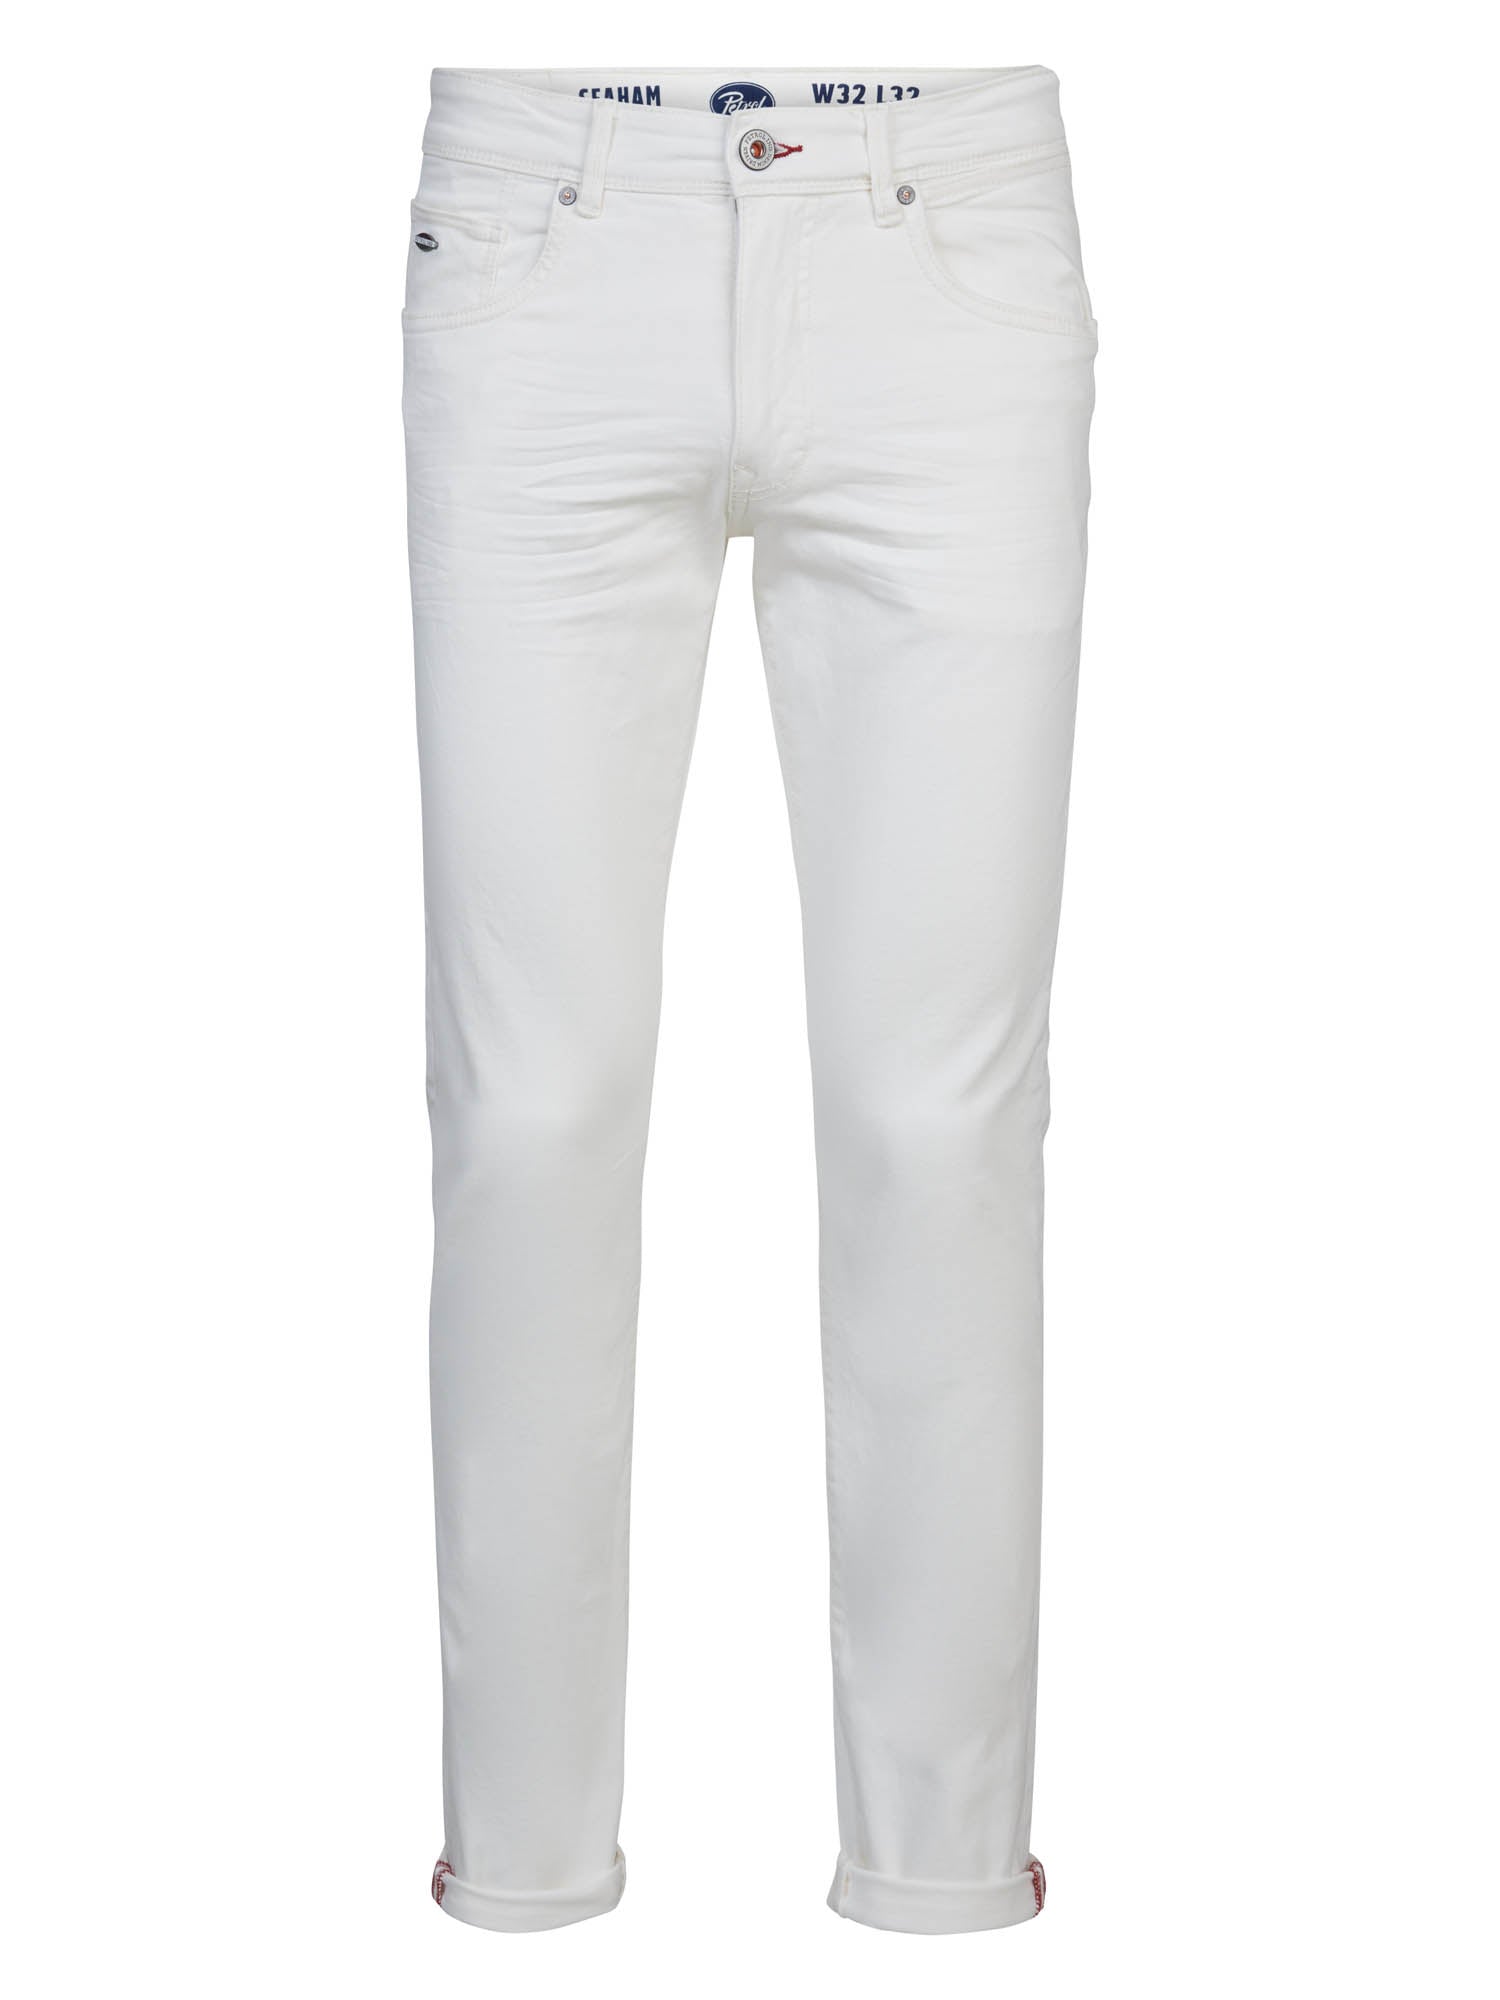 Petrol Industries Seaham Coloured, Slim-fit Jeans Bright White - 34